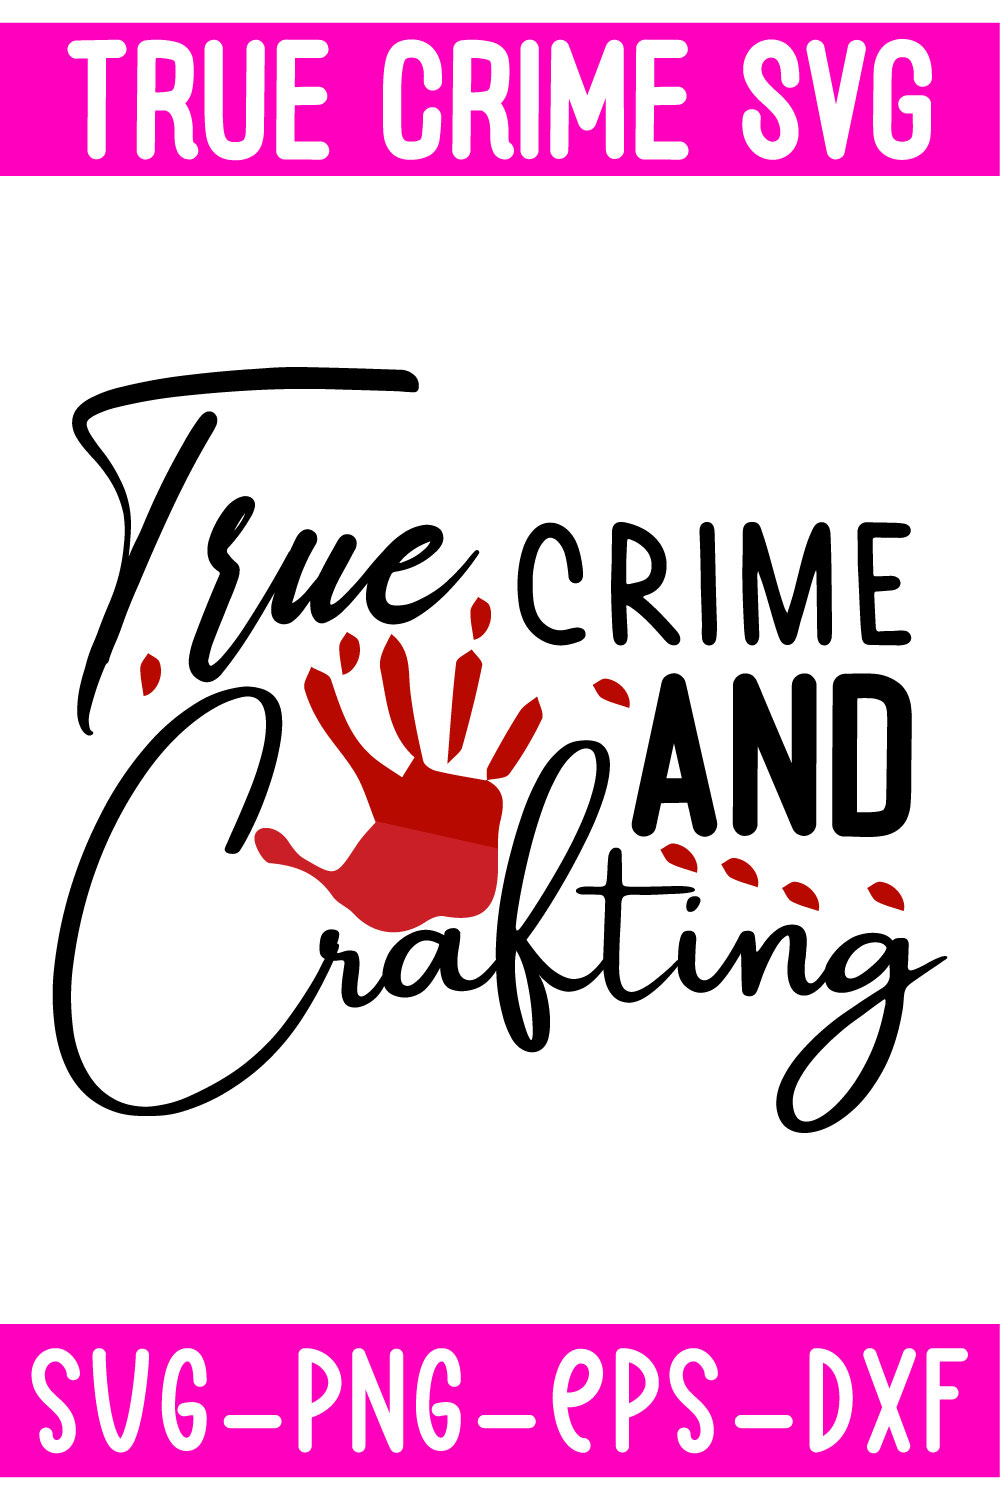 True crime and crafting svg.